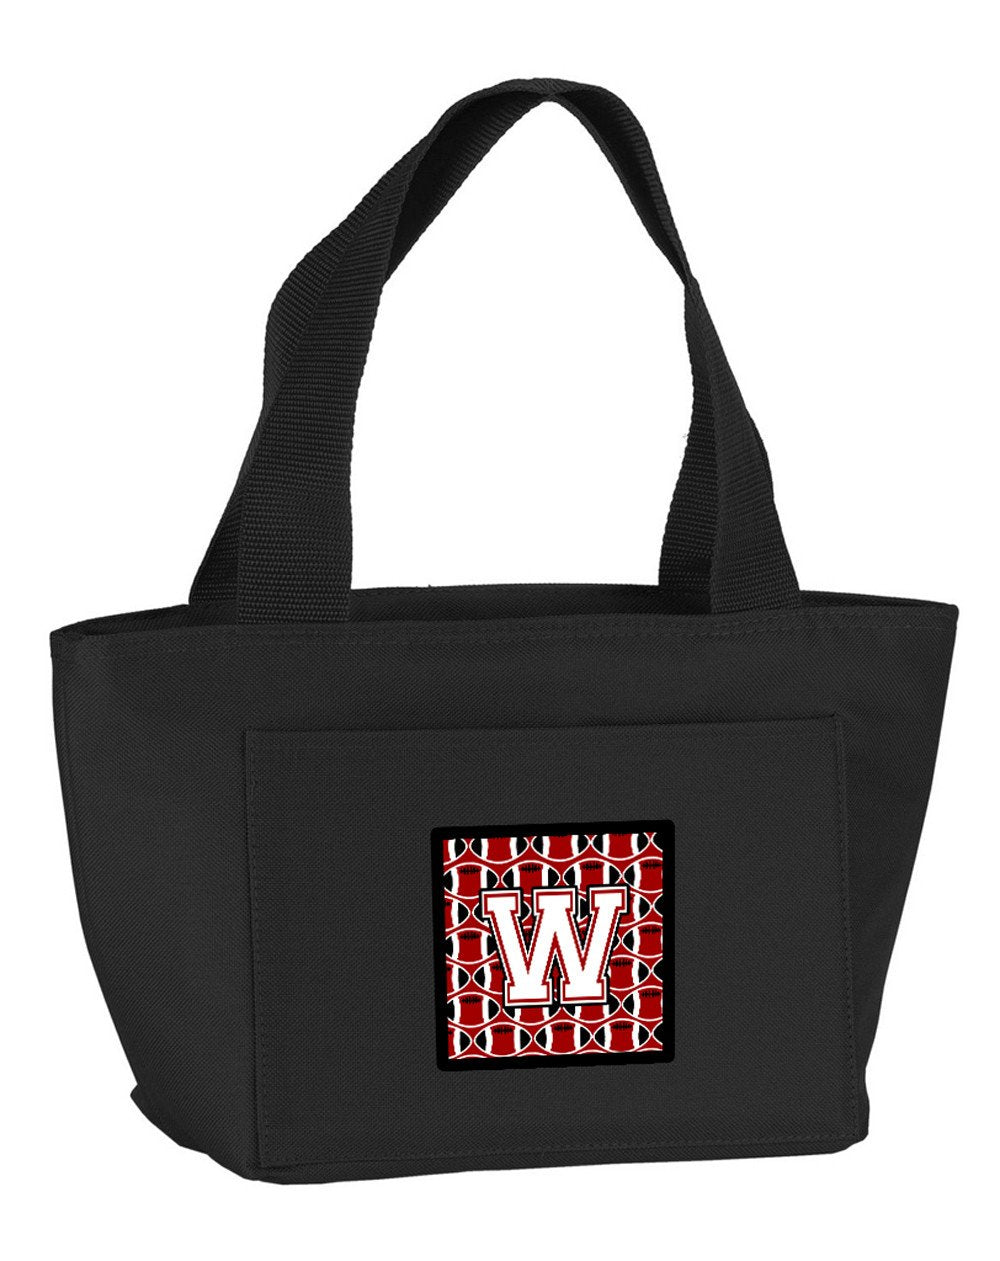 Letter W Football Cardinal and White Lunch Bag CJ1082-WBK-8808 by Caroline's Treasures